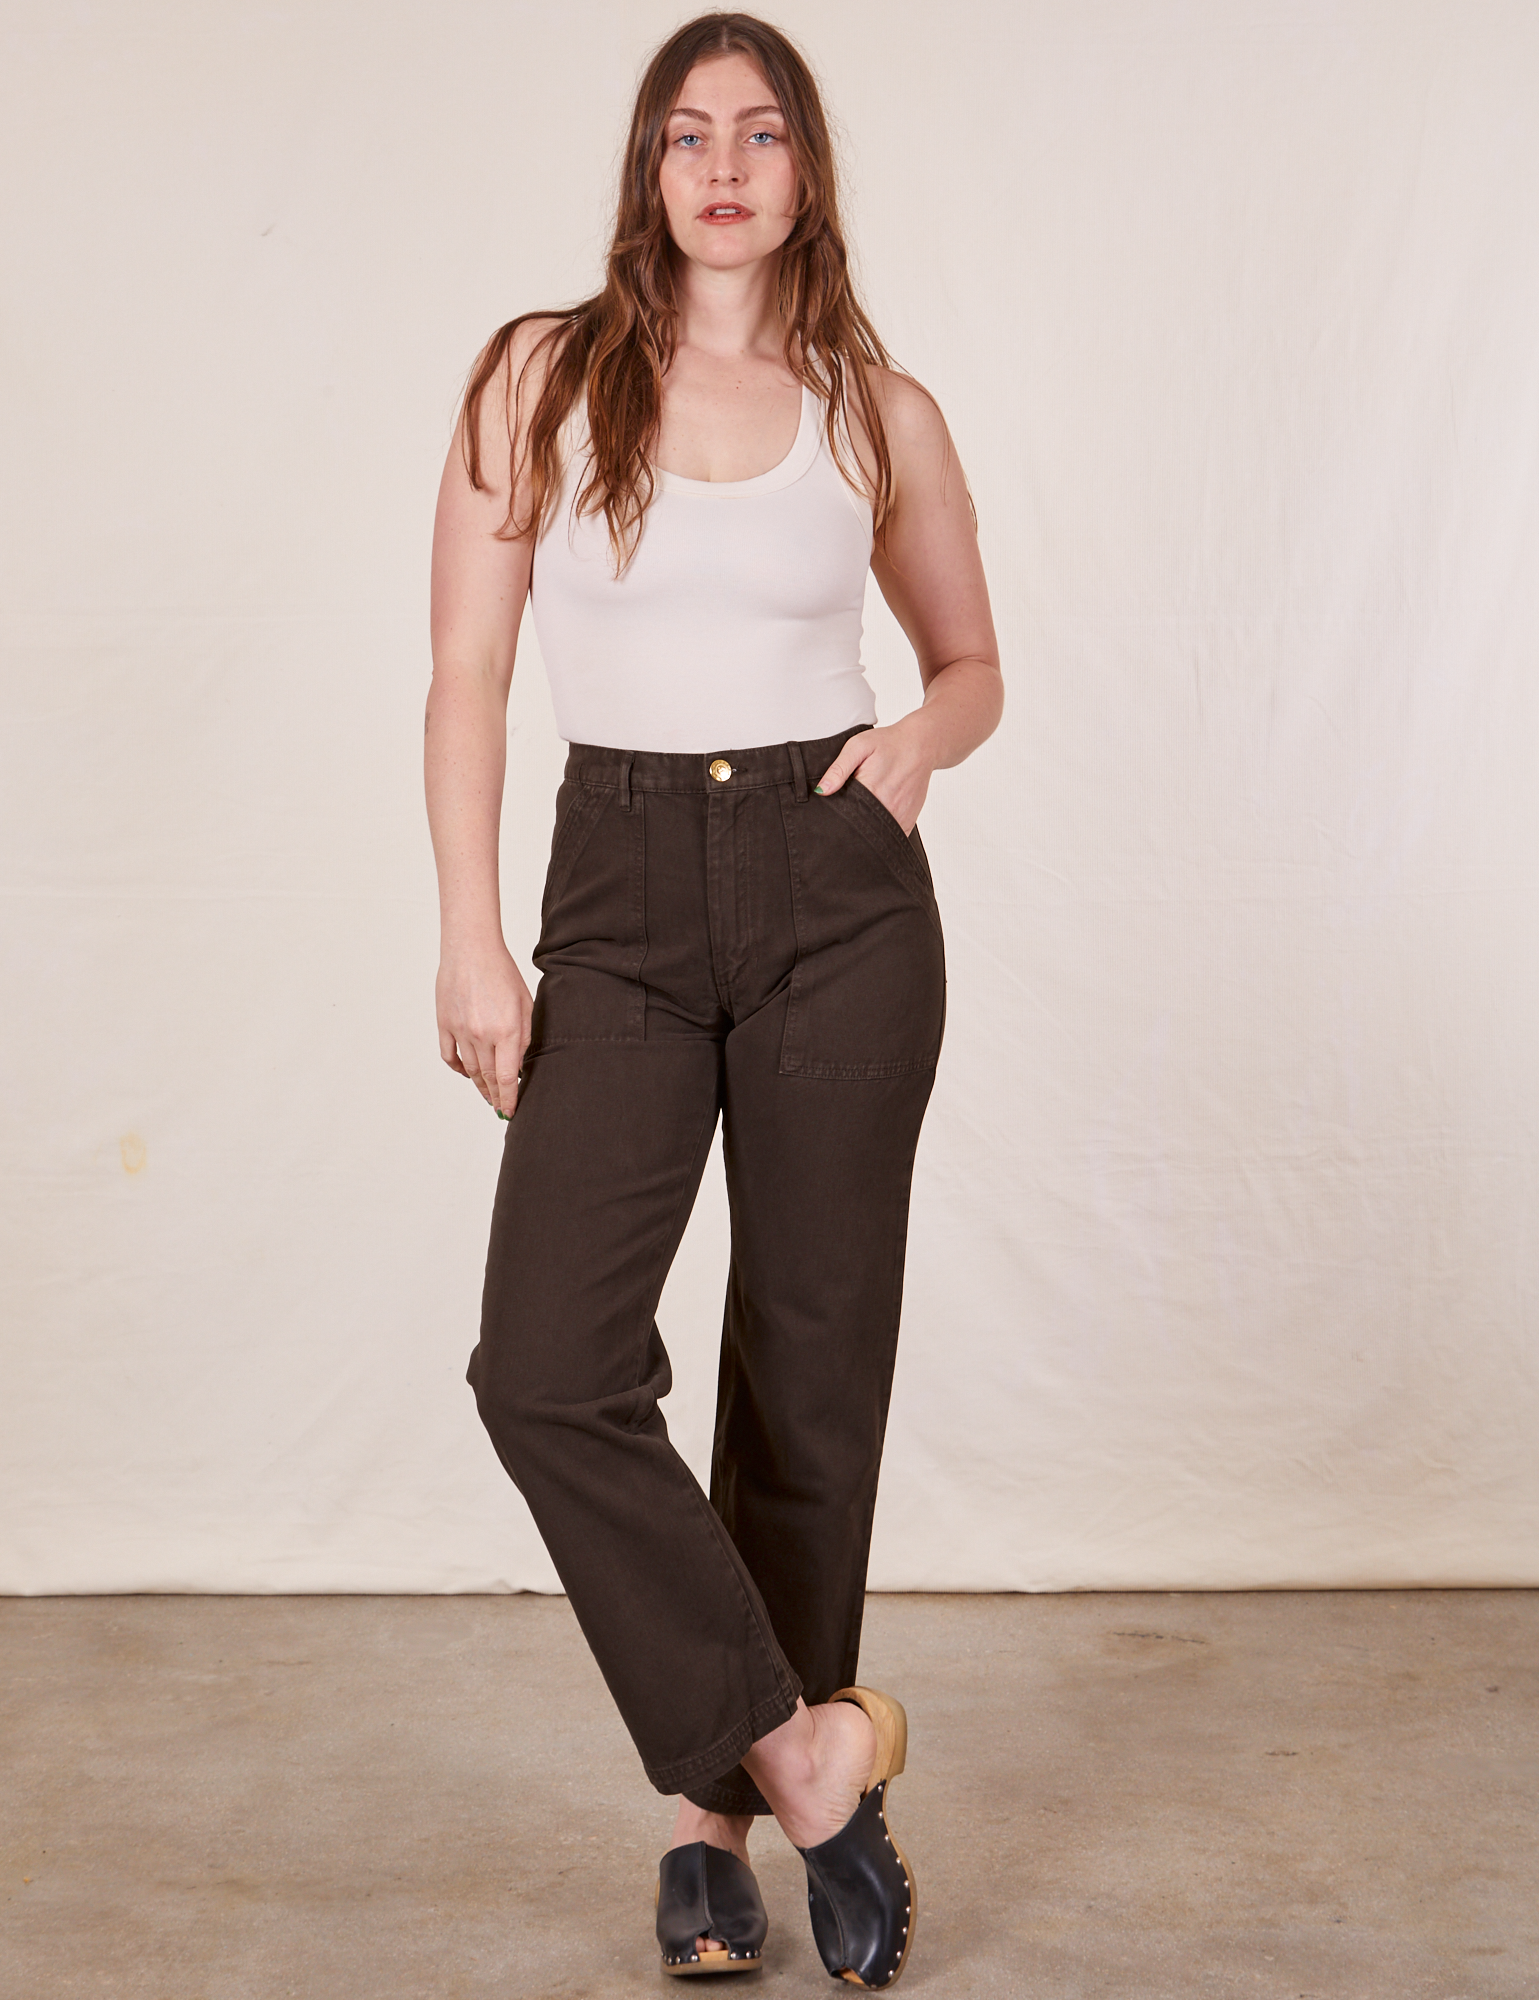 Allison is 5&#39;10&quot; and wearing Long S Work Pants in Espresso Brown paired with a vintage off-white Tank Top